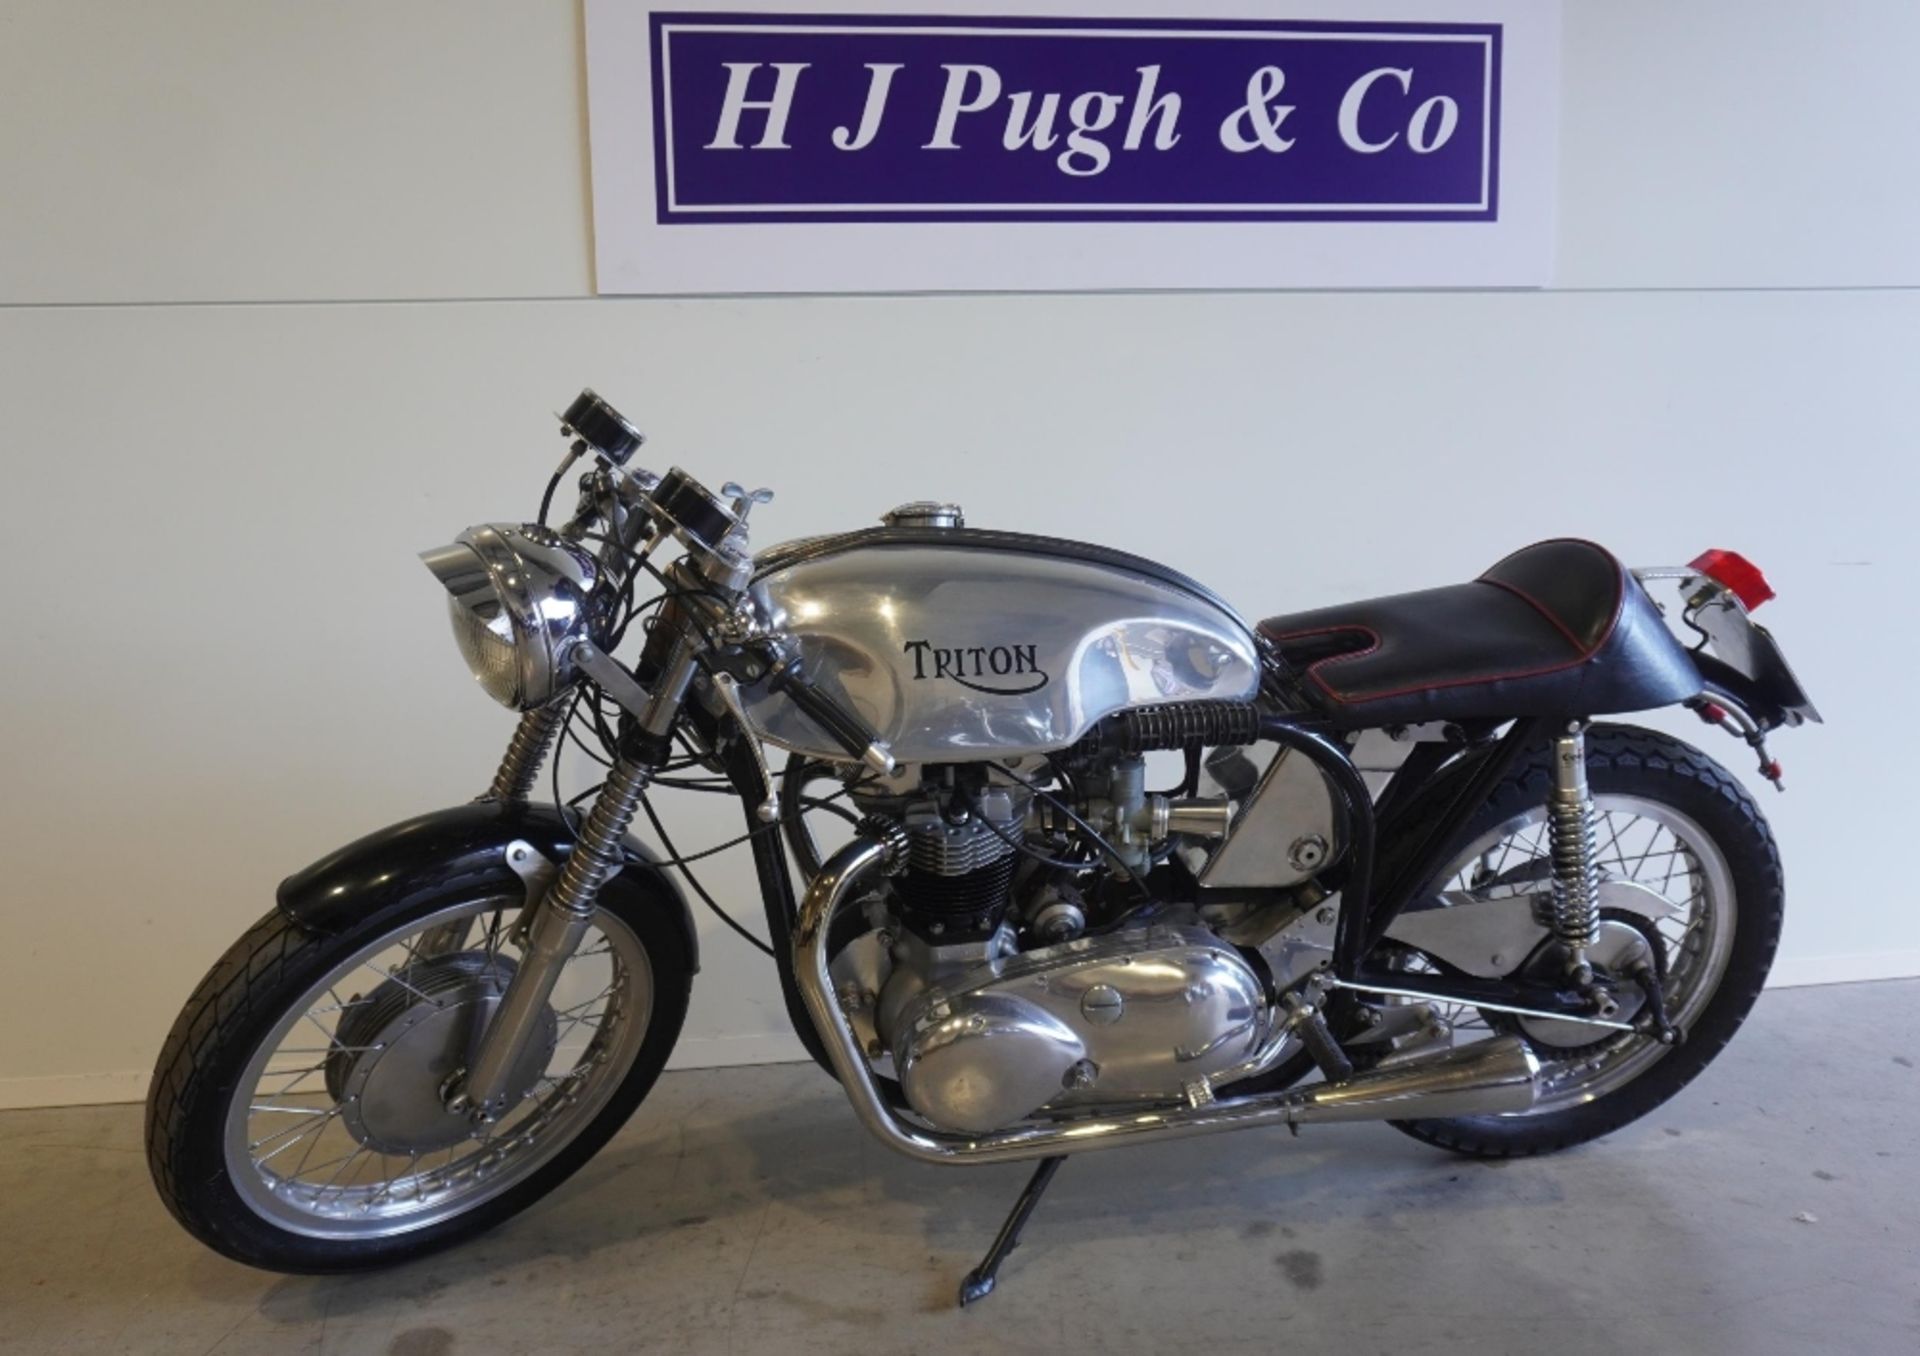 Triton motorcycle 1957. With Triumph T110 engine 650cc. Frame No. N1476459 Engine No. T110019807. - Image 3 of 5